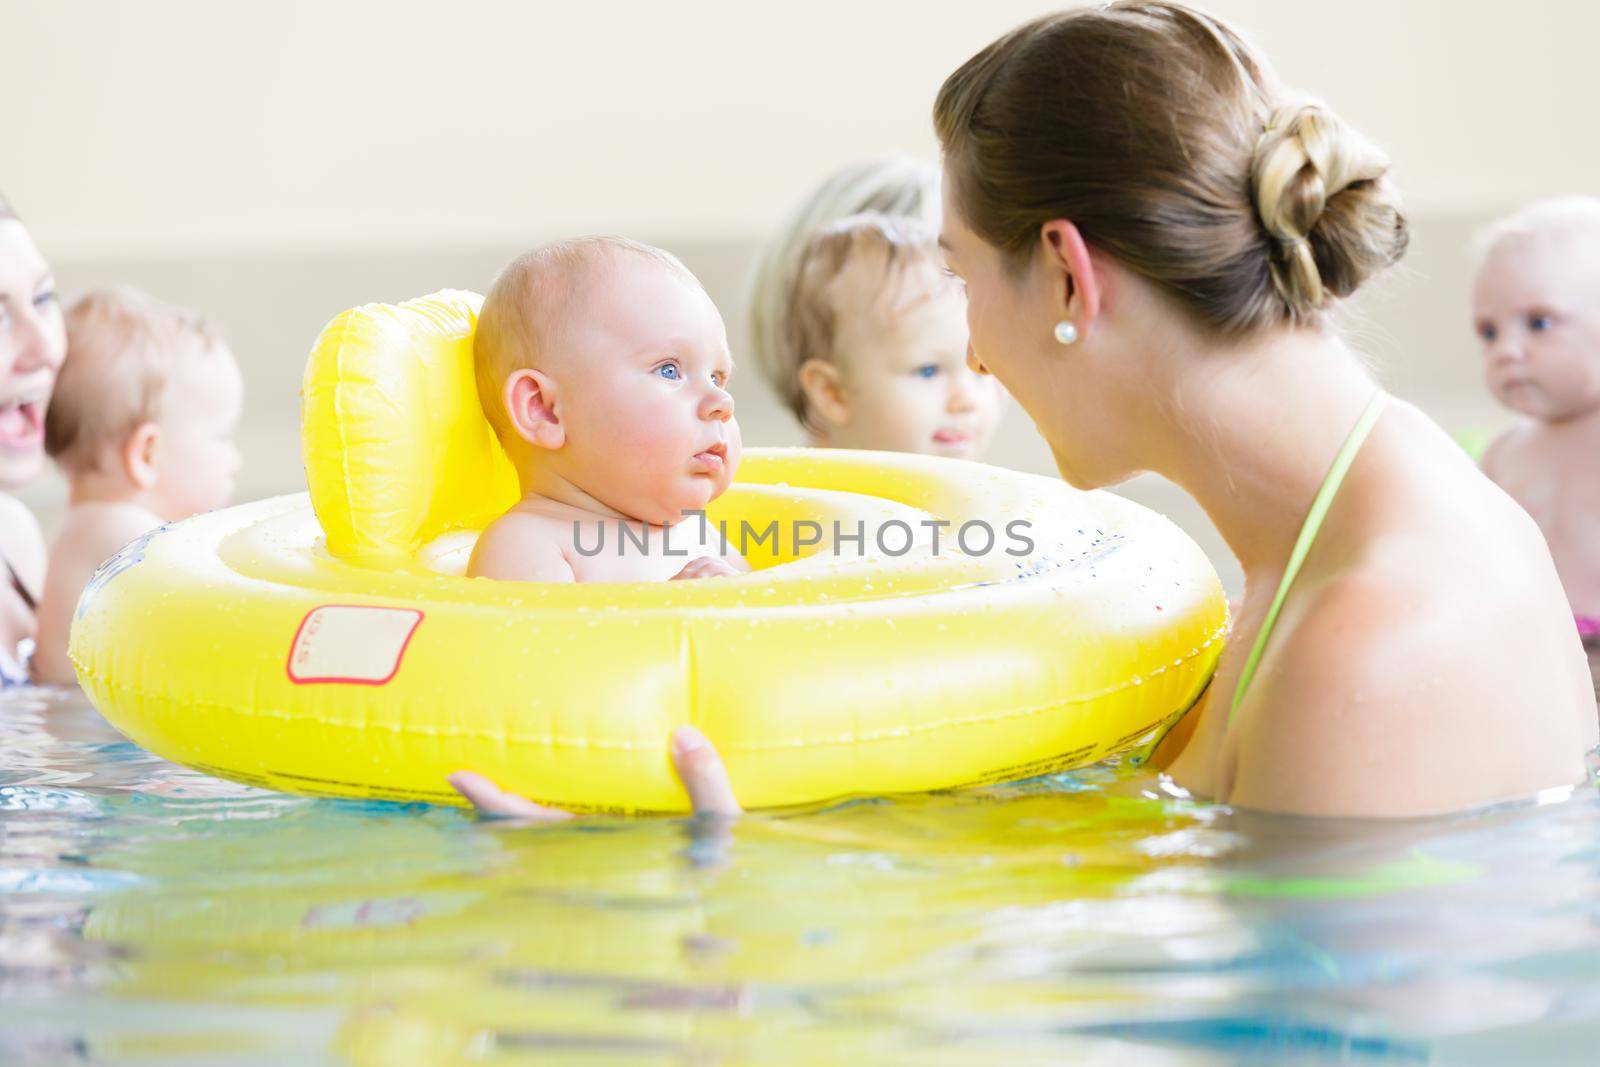 Mothers and kids having fun together playing with toys in pool by Kzenon